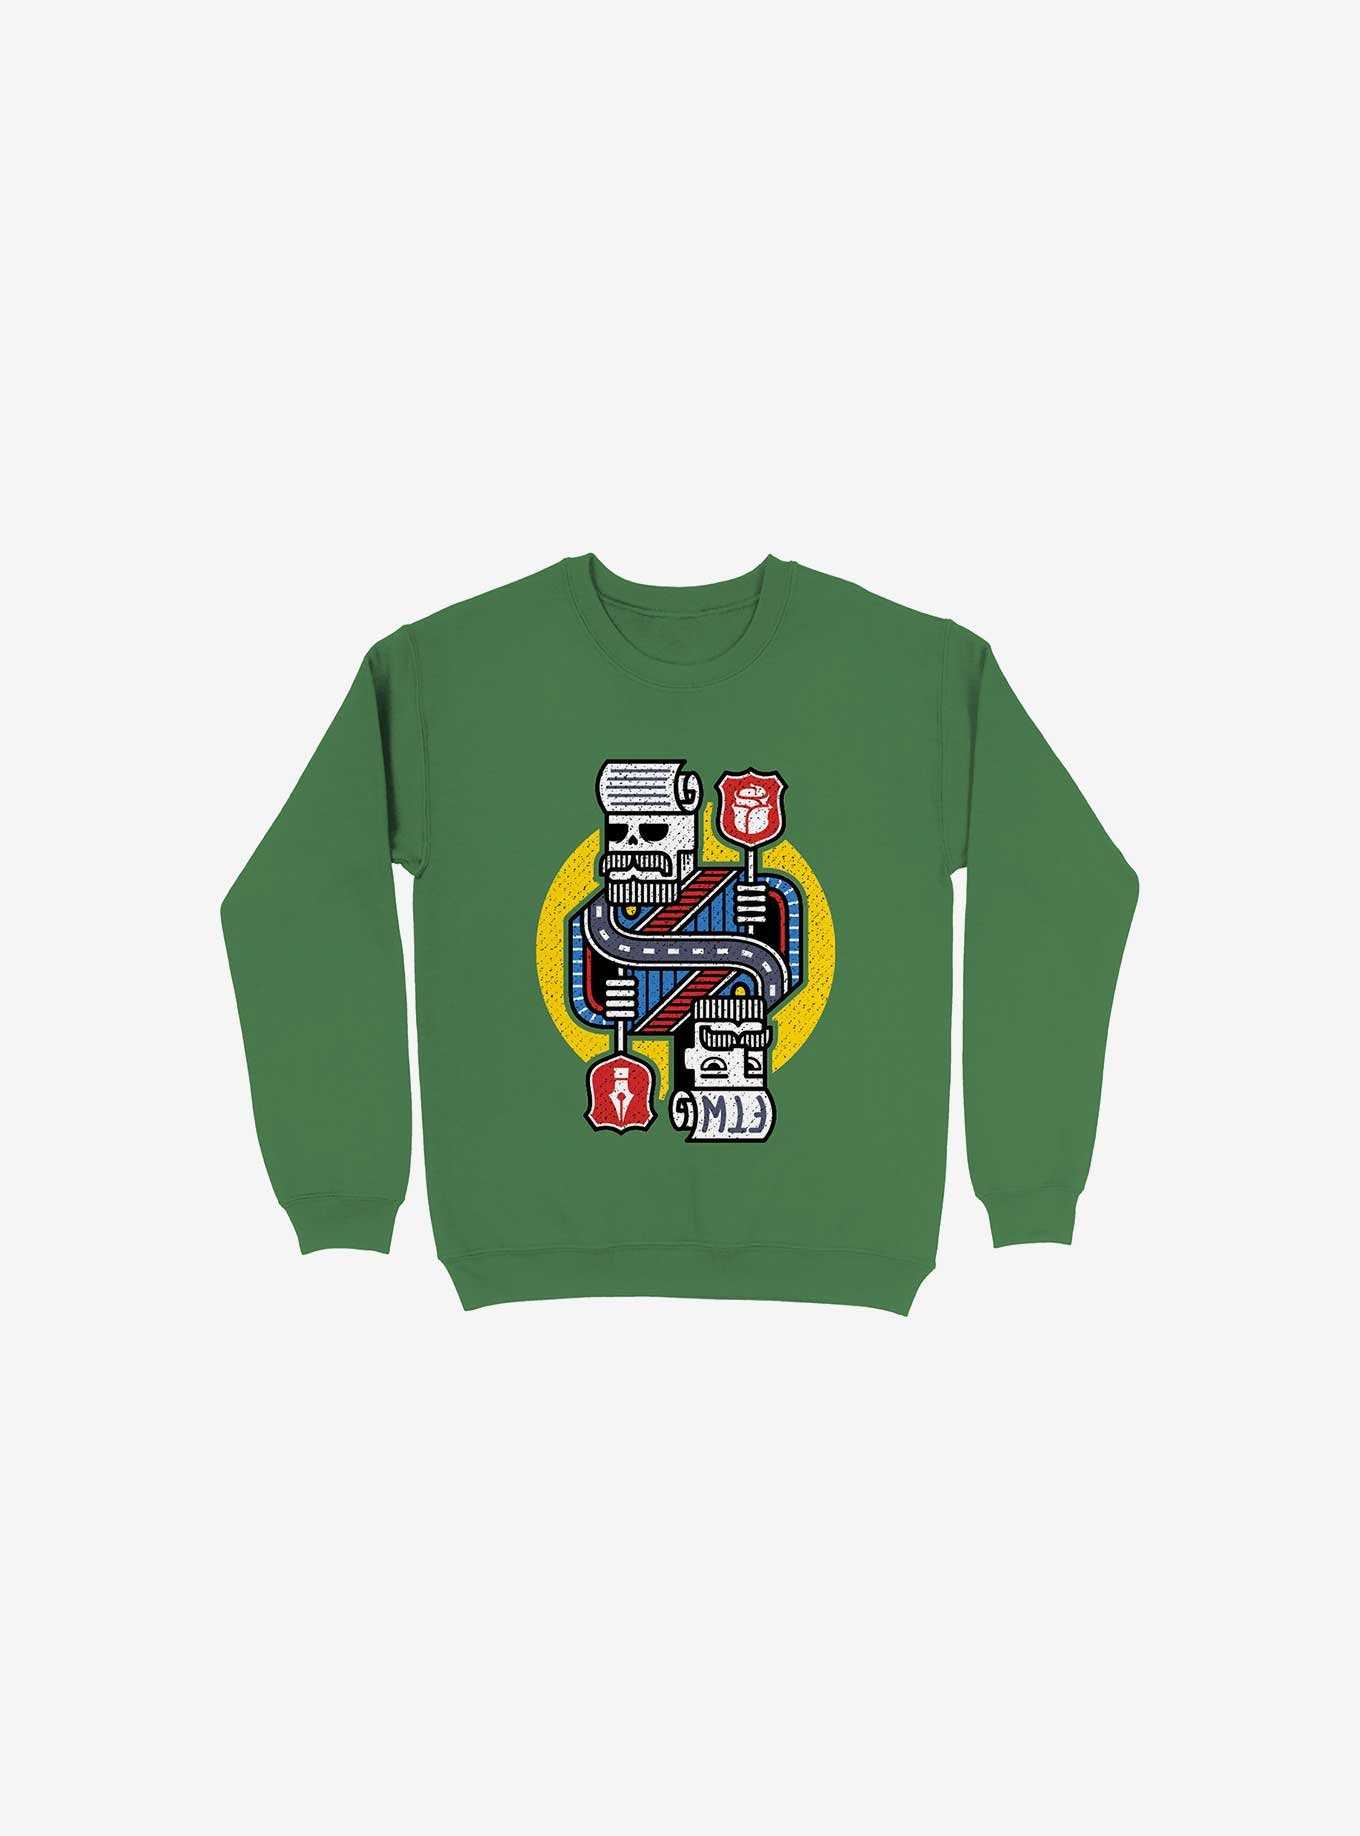 For The Win Kelly Green Sweatshirt, , hi-res